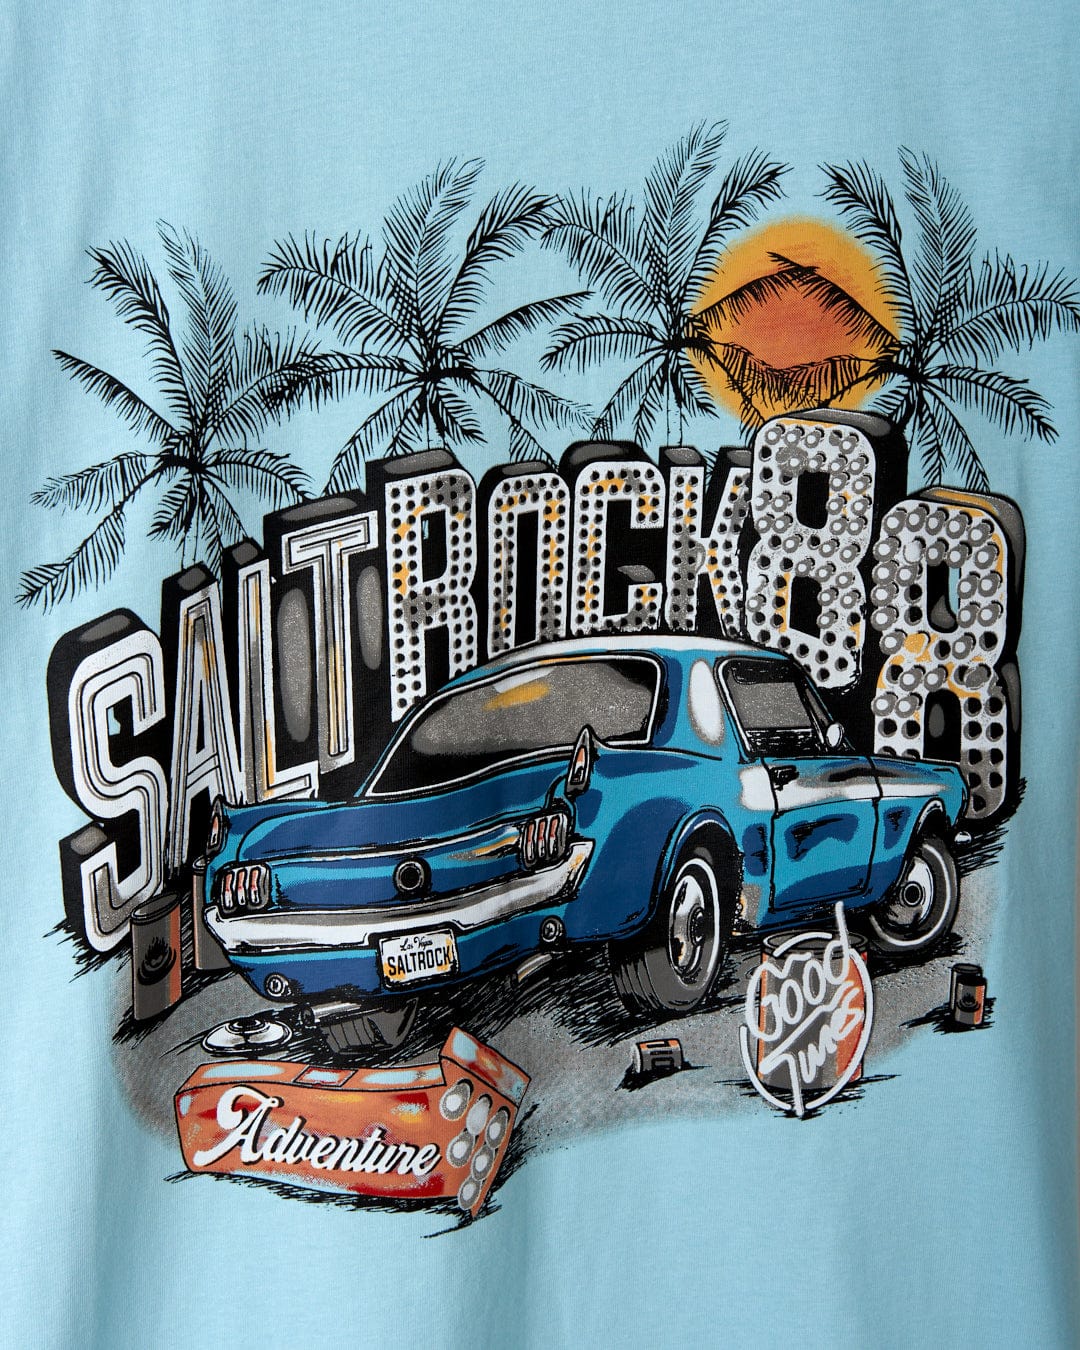 Graphic print on a blue cotton Neon Boneyard t-shirt by Saltrock featuring the text "Saltrock 88," a vintage car illustration, palm trees, a setting sun, and additional decorative elements with adventure and surfing themes.